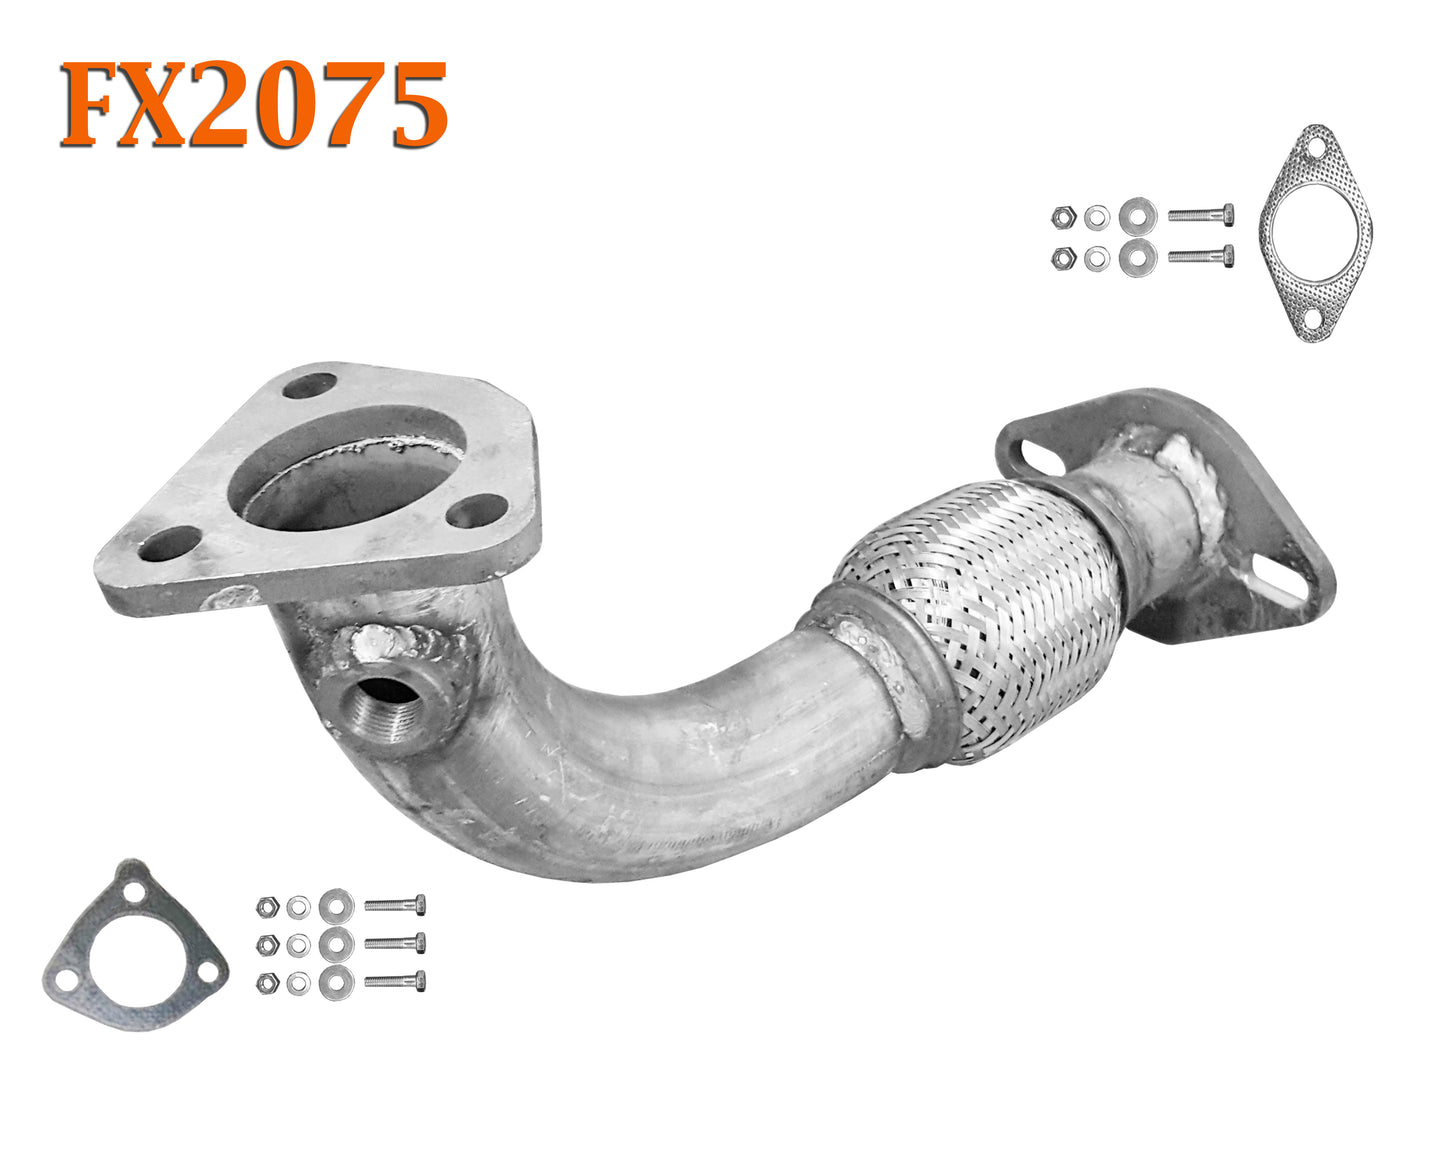 FX2075 Direct Fit Exhaust Flange Repair Flex Pipe Replacement Kit With Gaskets